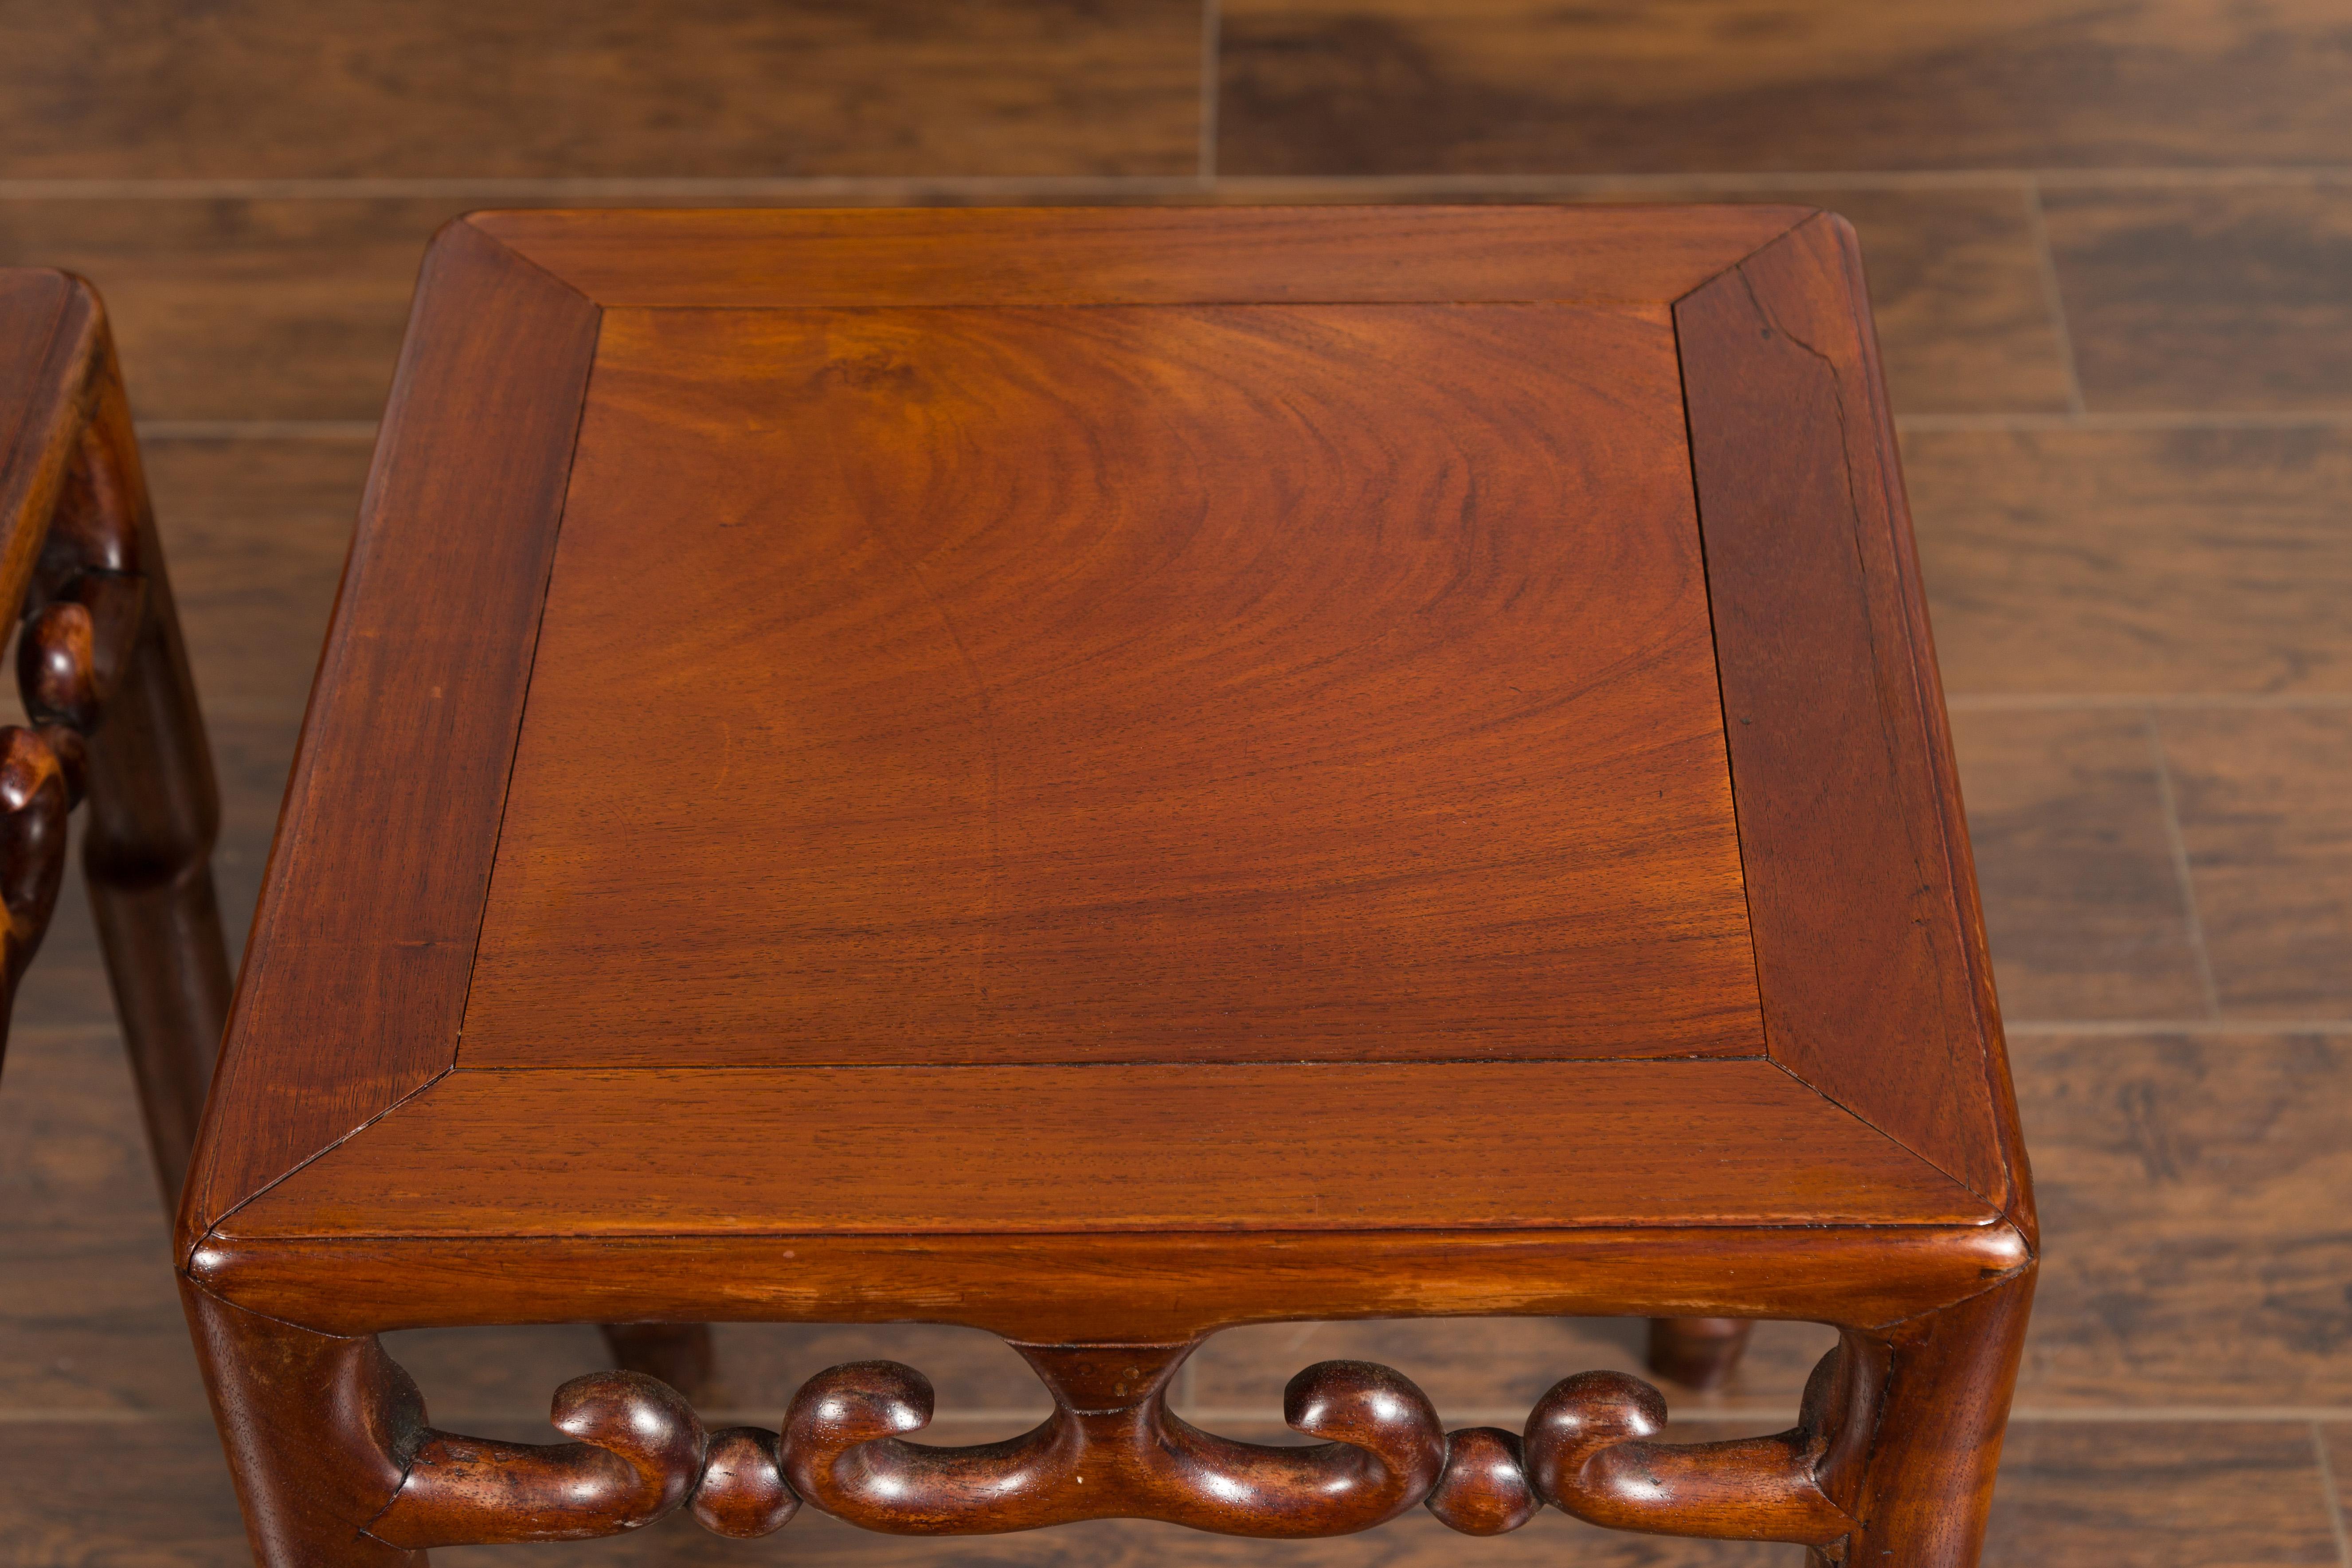 Pair of Asian Midcentury Mahogany Side Tables with Scrolling Fretwork Motifs For Sale 3